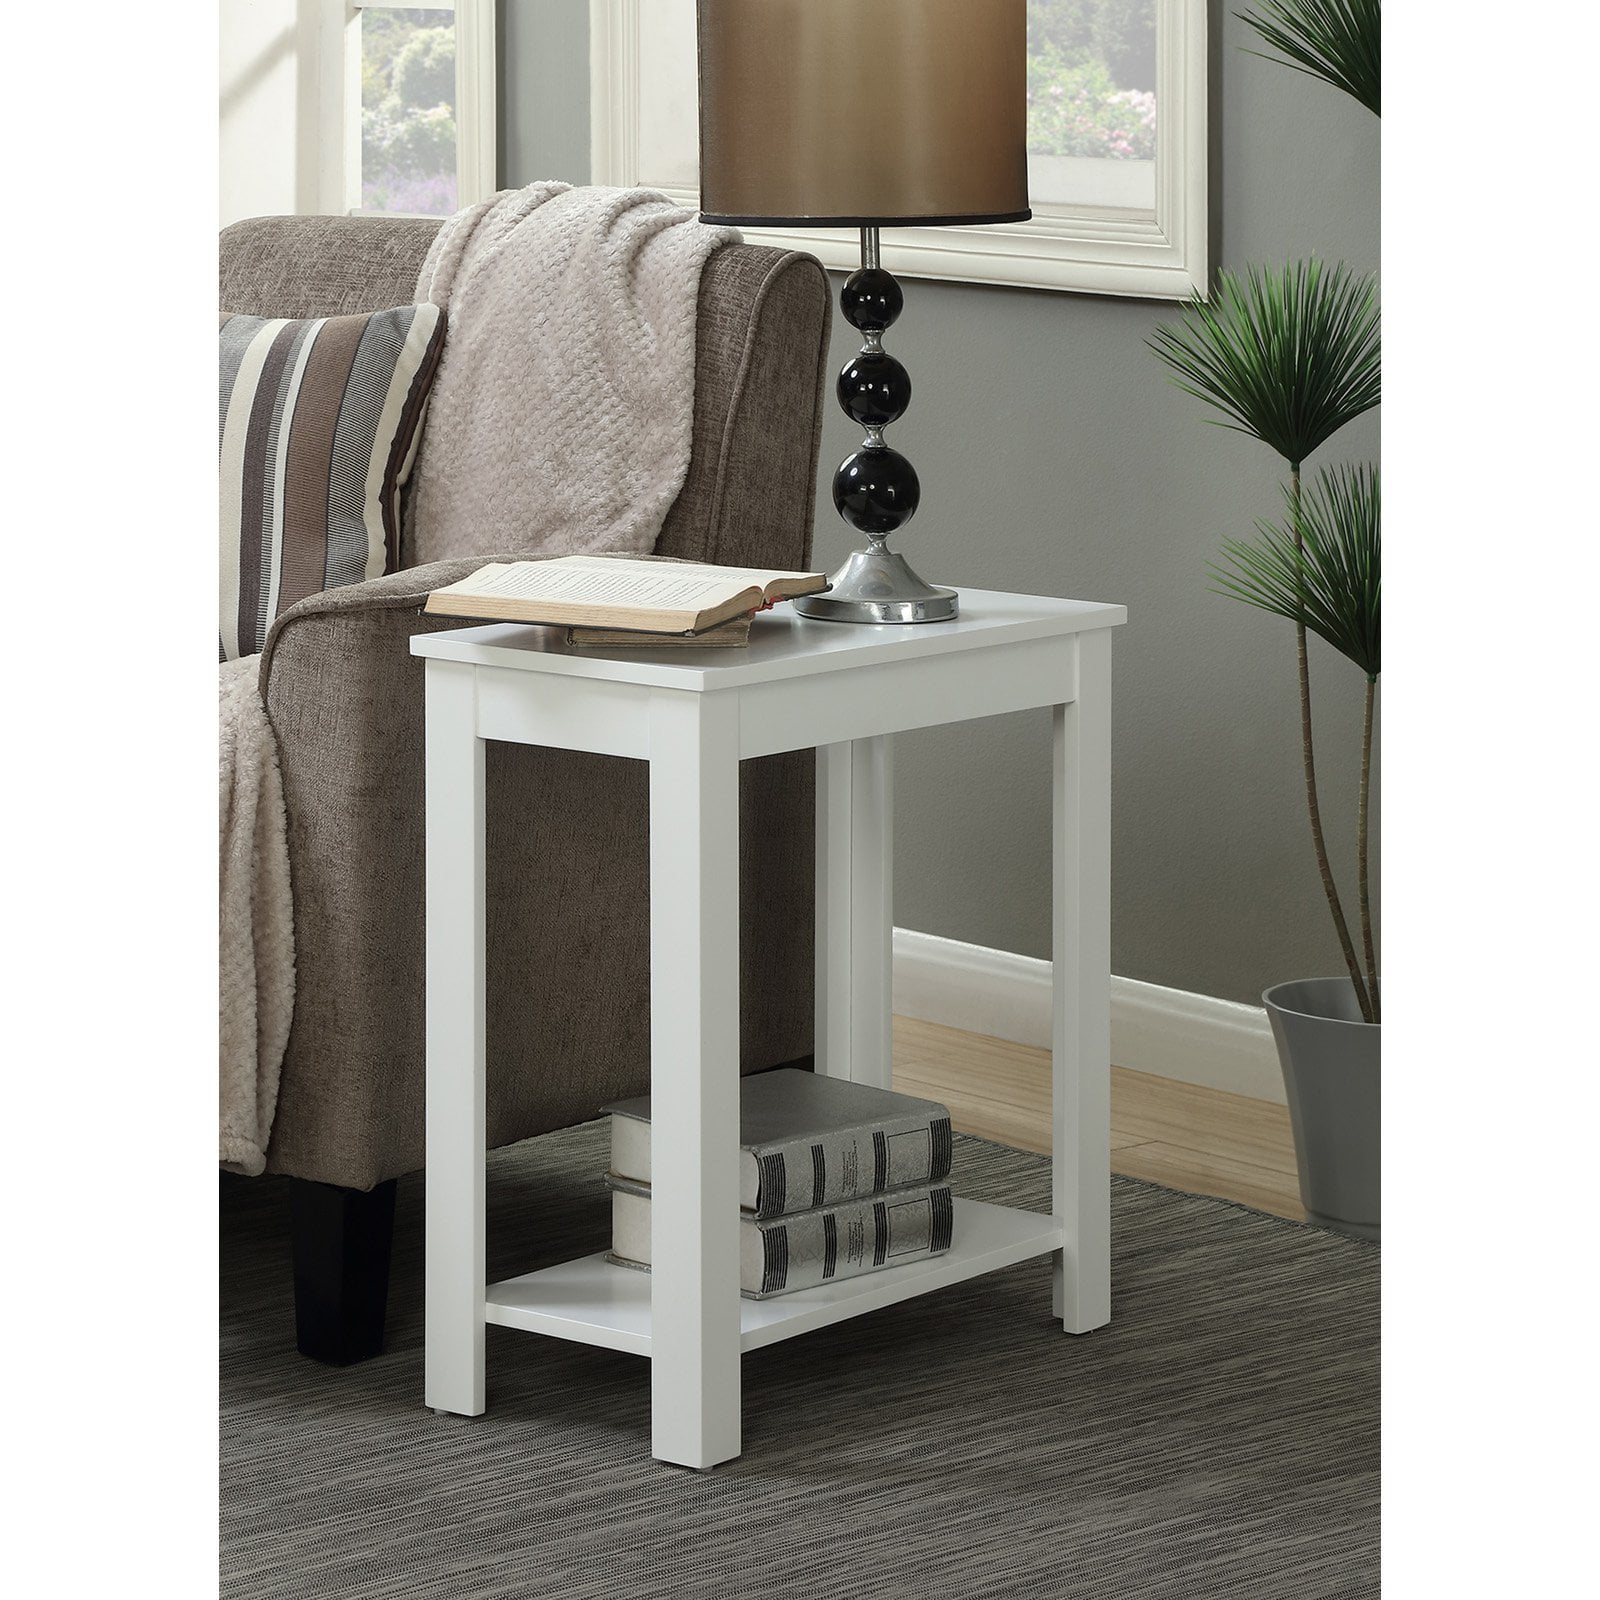 Convenience Concepts Designs2go Baja, Chairside End Table With Lamp